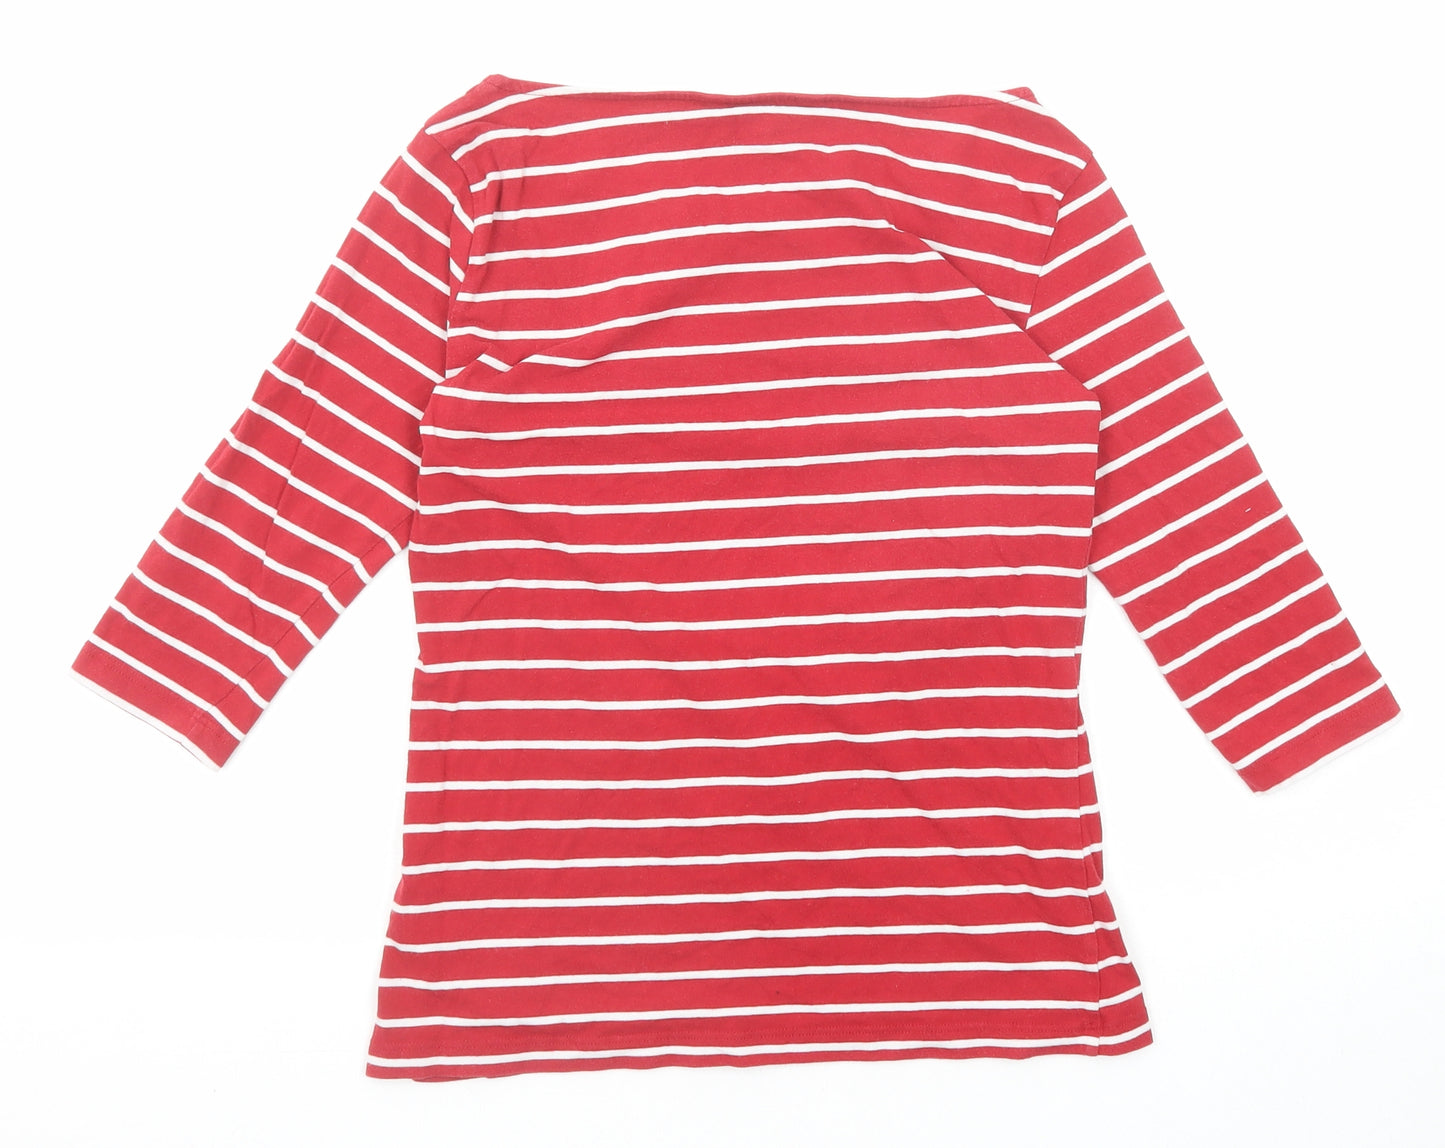 French Connection Womens Red Striped Cotton Basic T-Shirt Size S Boat Neck